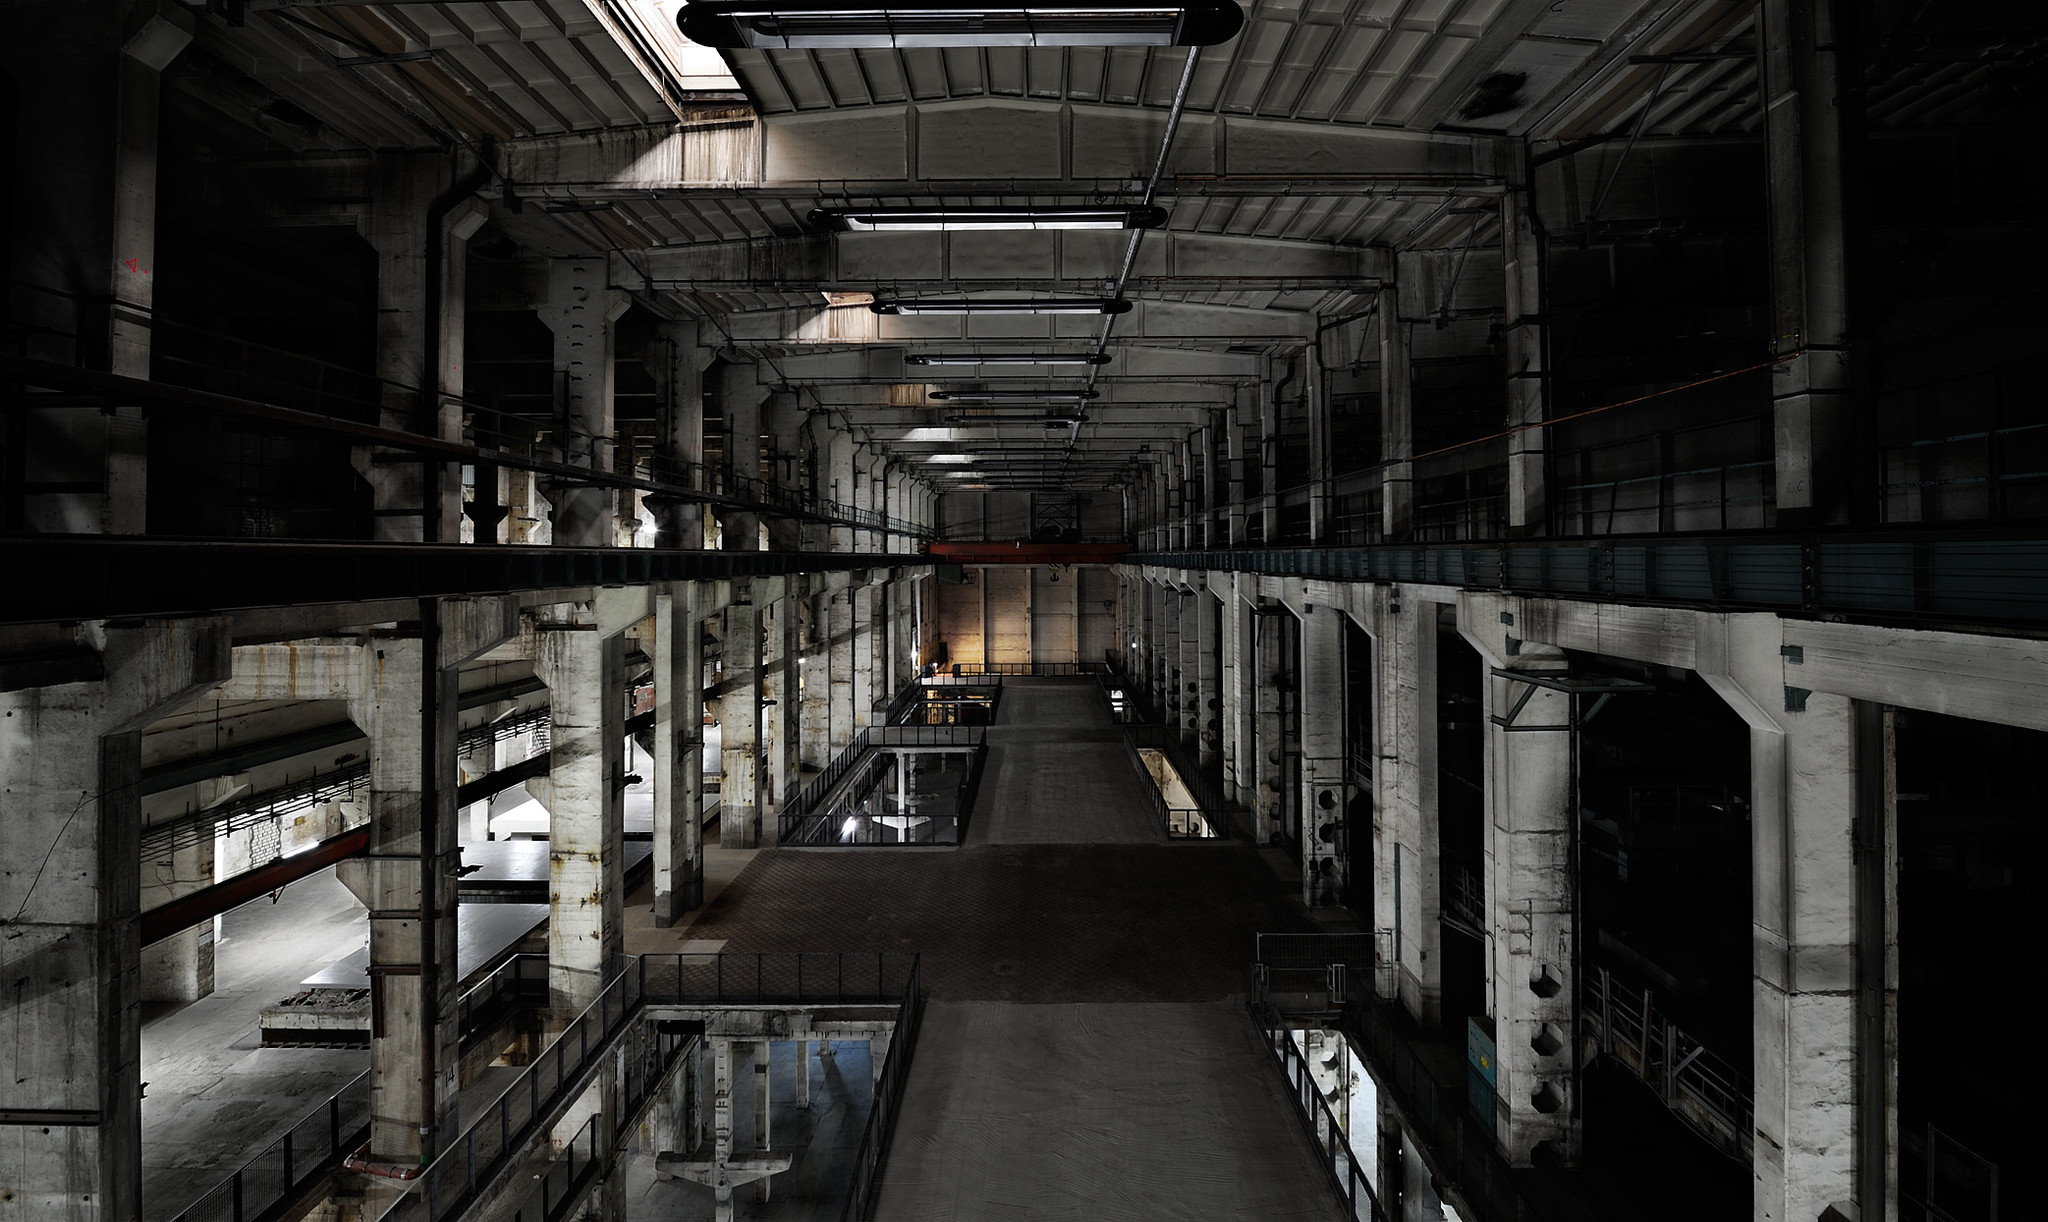 The longawaited Berlin techno museum now has a home